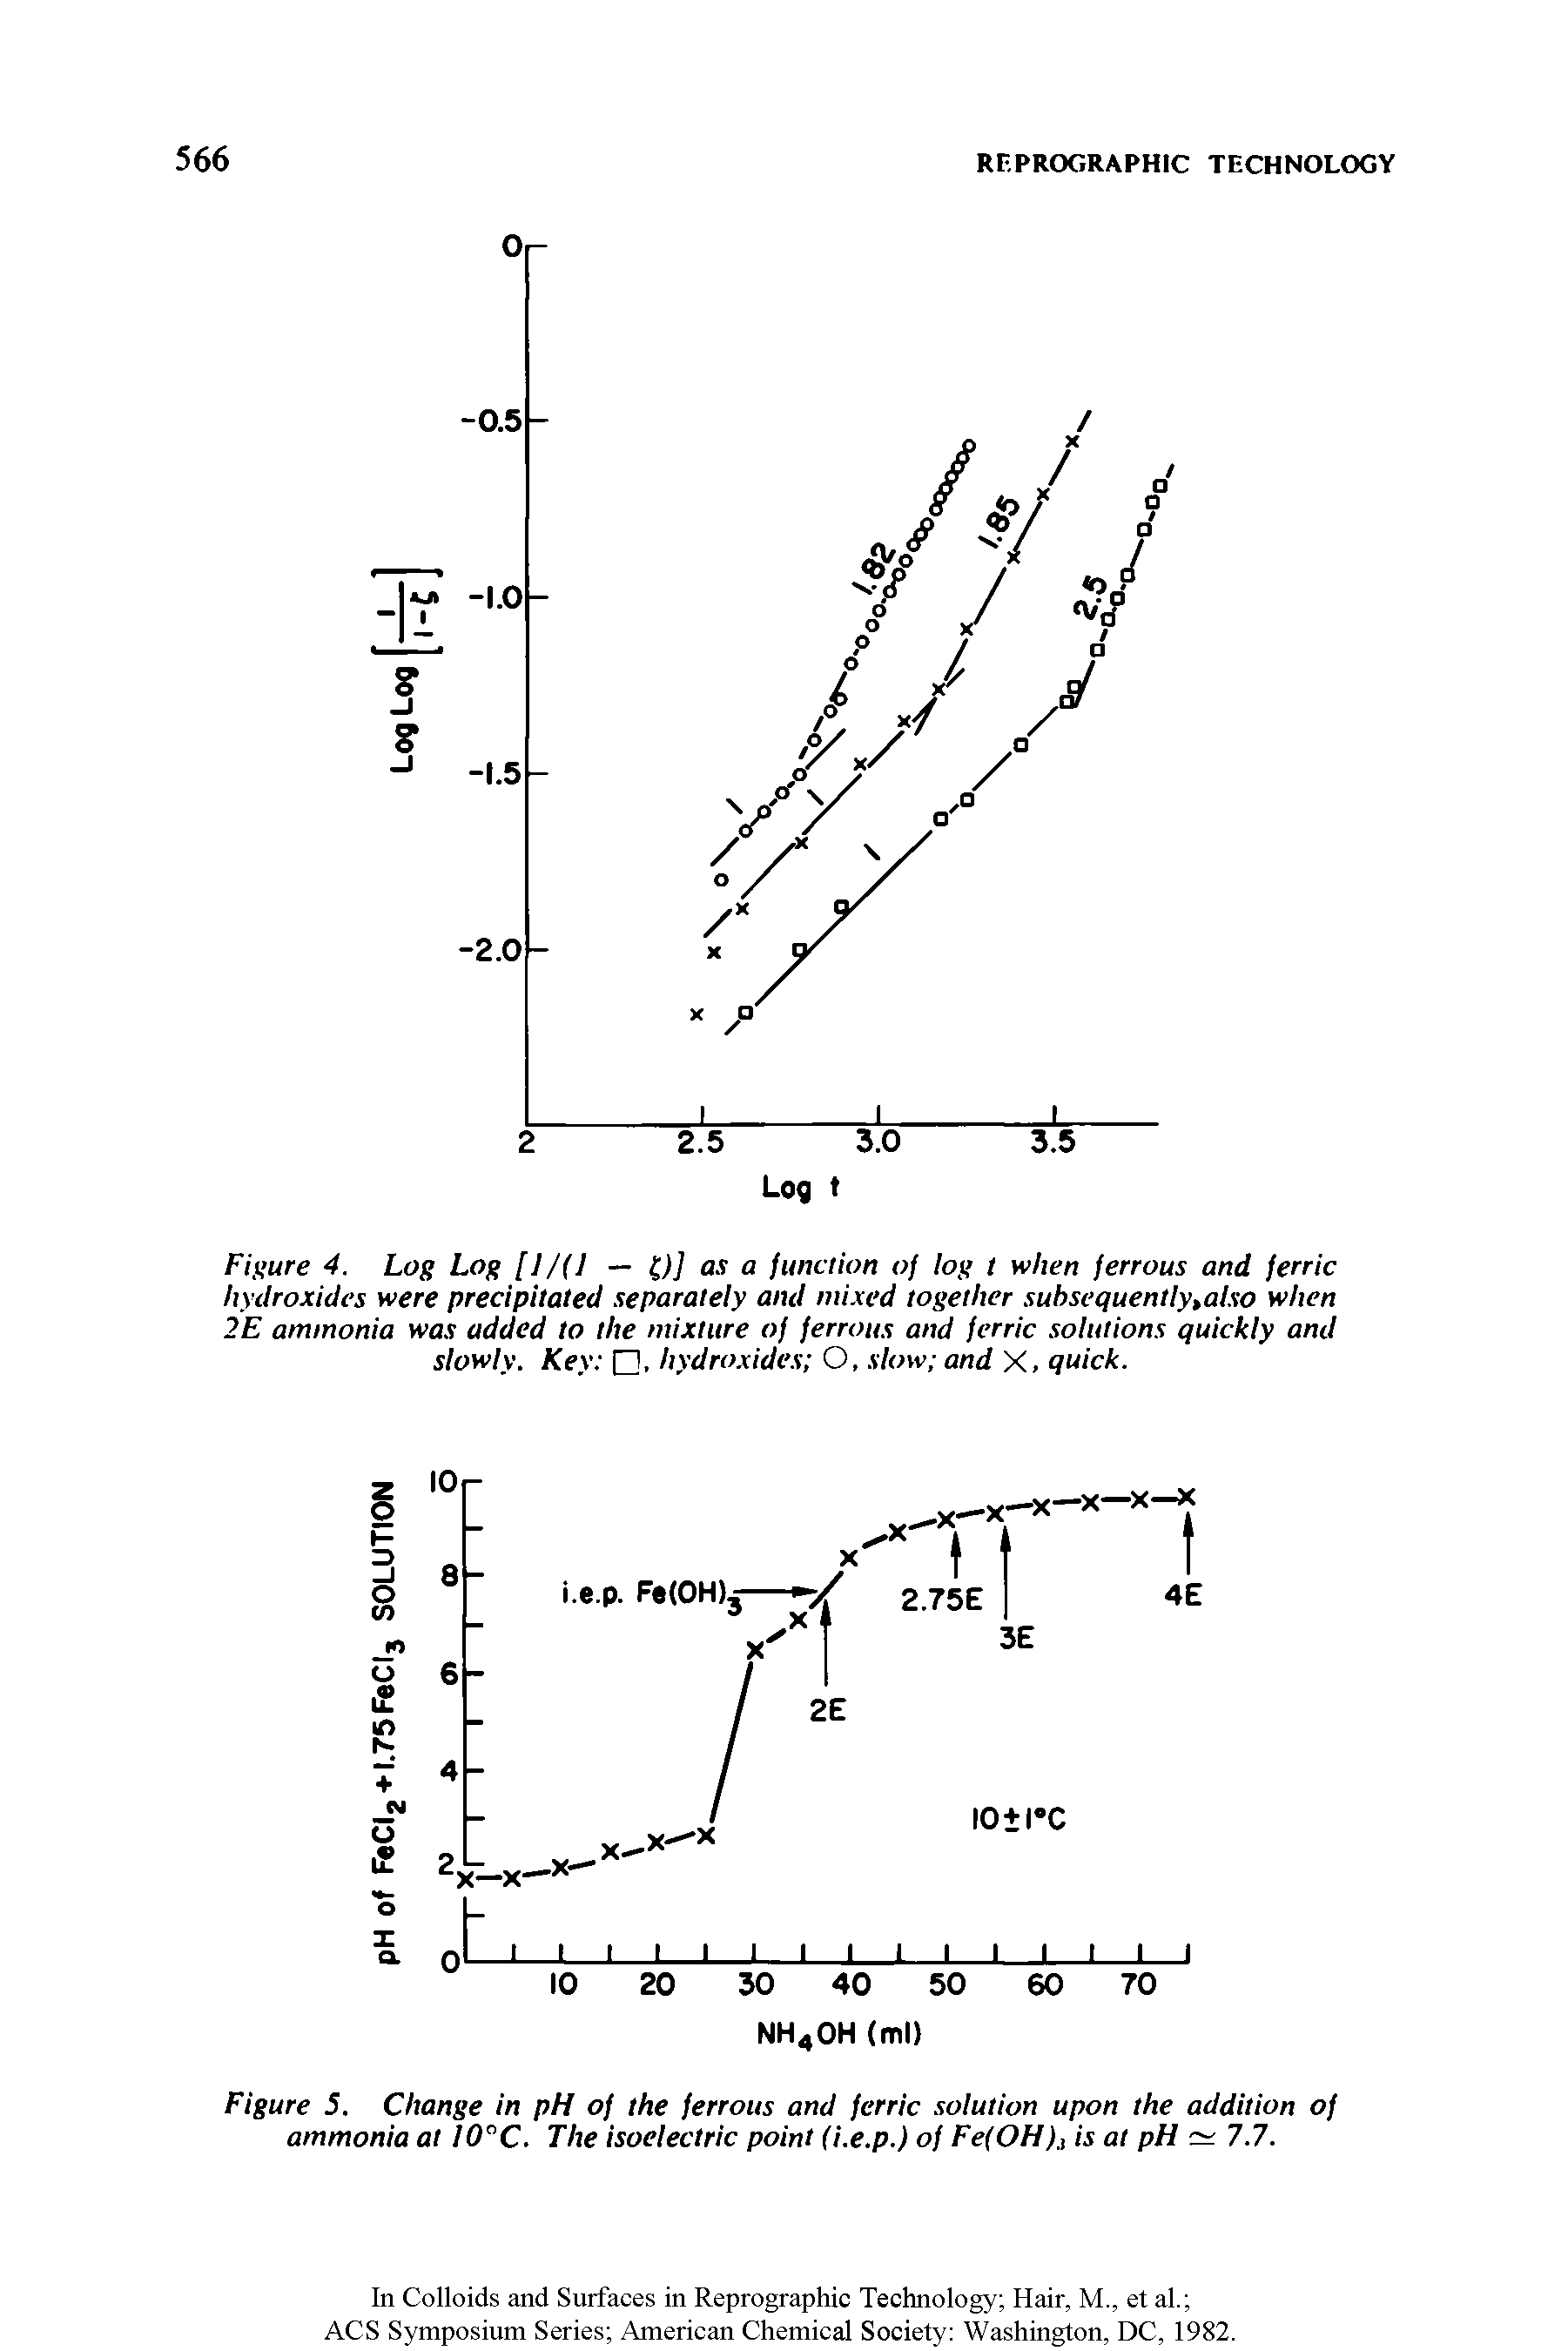 Figure 5. Change in pH of the ferrous and ferric solution upon the addition of ammonia at I0°C. The isoelectric point (i.e.p.) of Fe(OH)., is at pH 7.7.